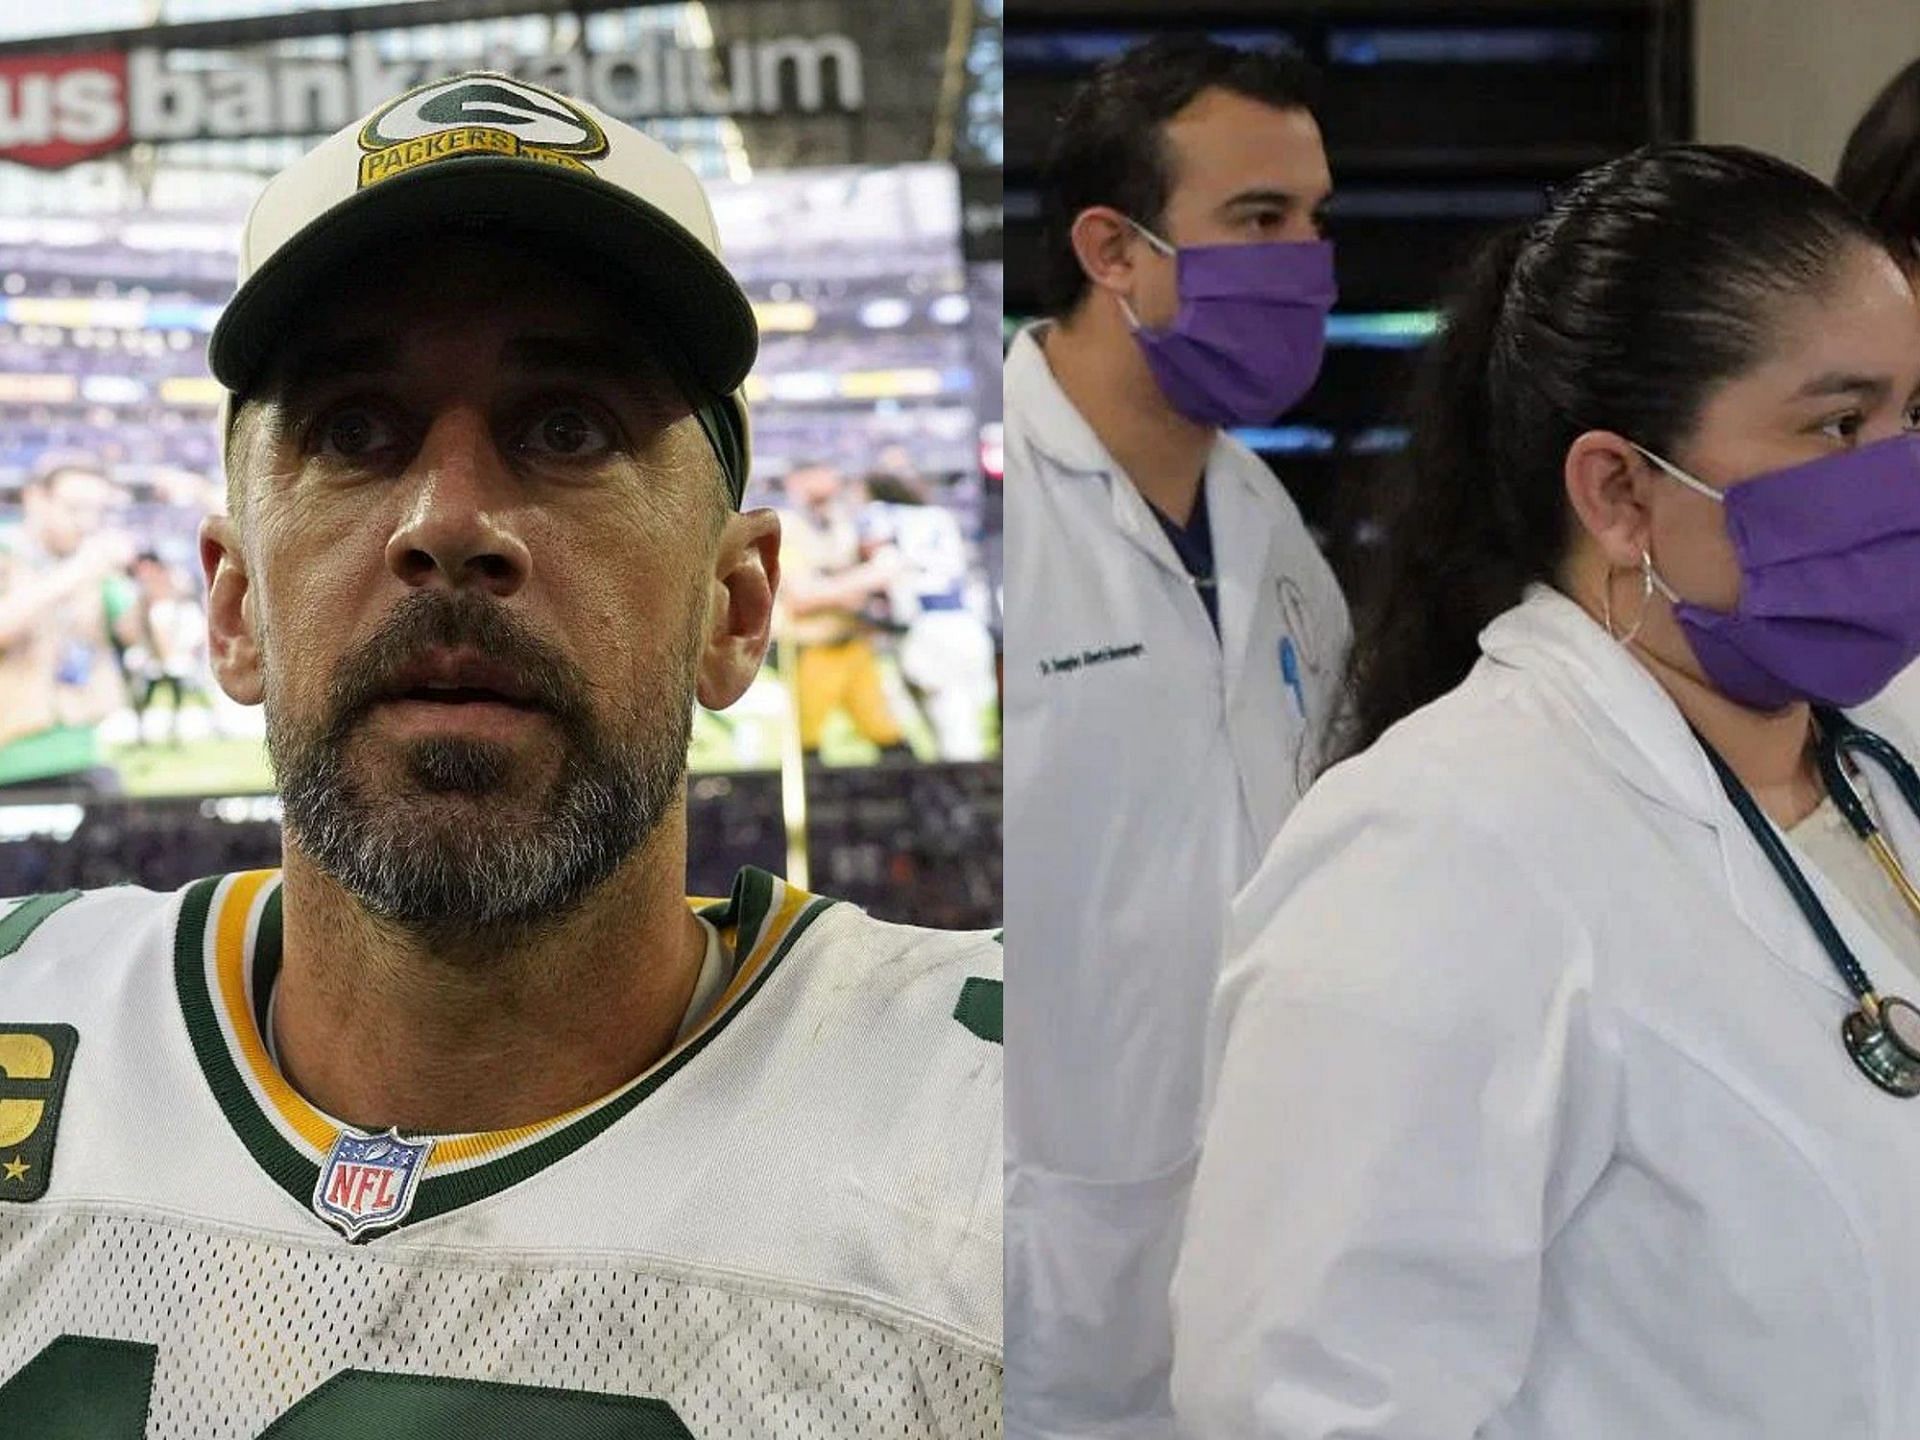 Aaron Rodgers at odds with the medical community